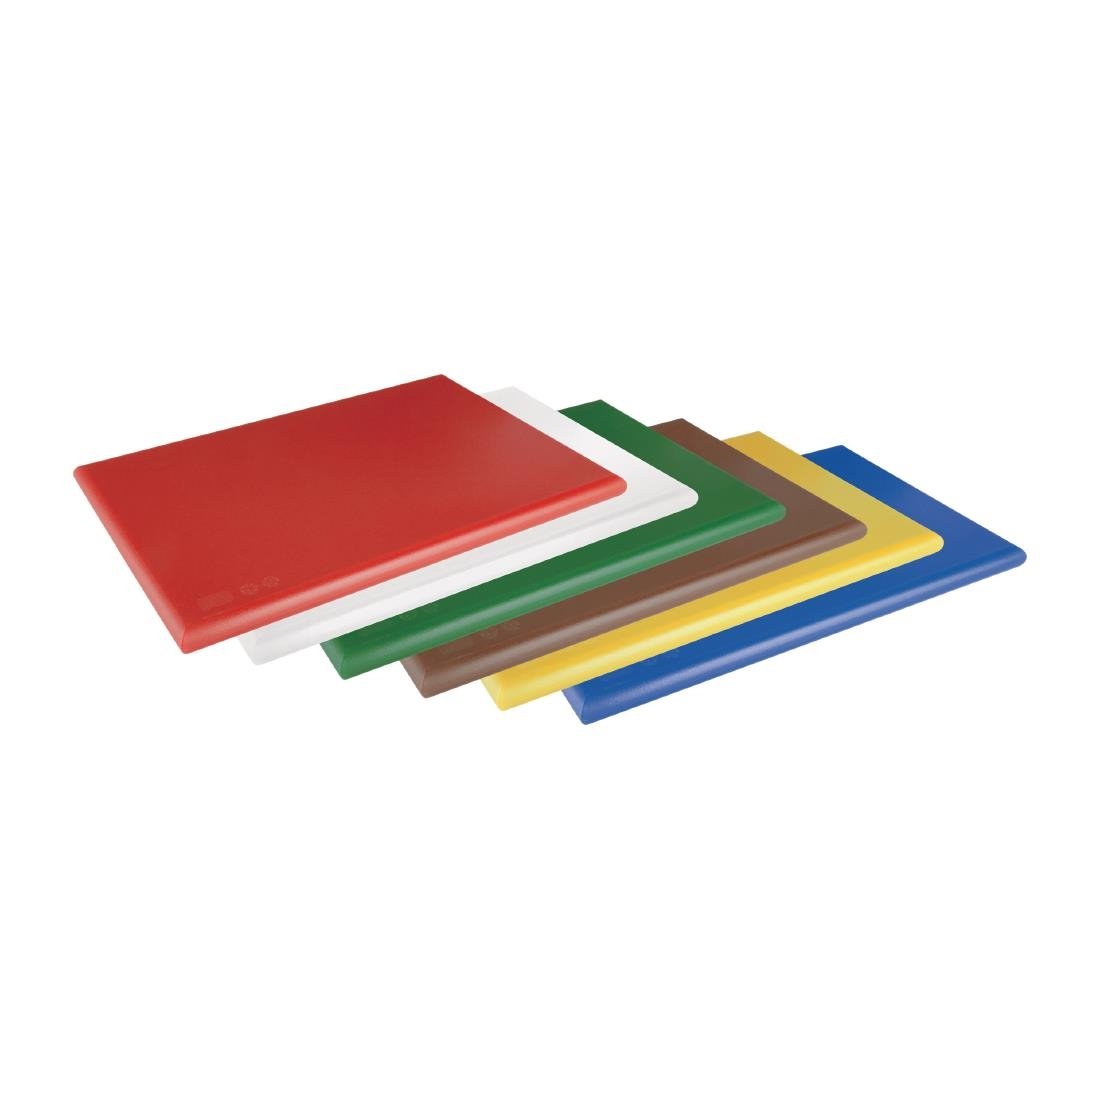 Hygiplas Extra Thick High Density Yellow Chopping Board Standard JD Catering Equipment Solutions Ltd